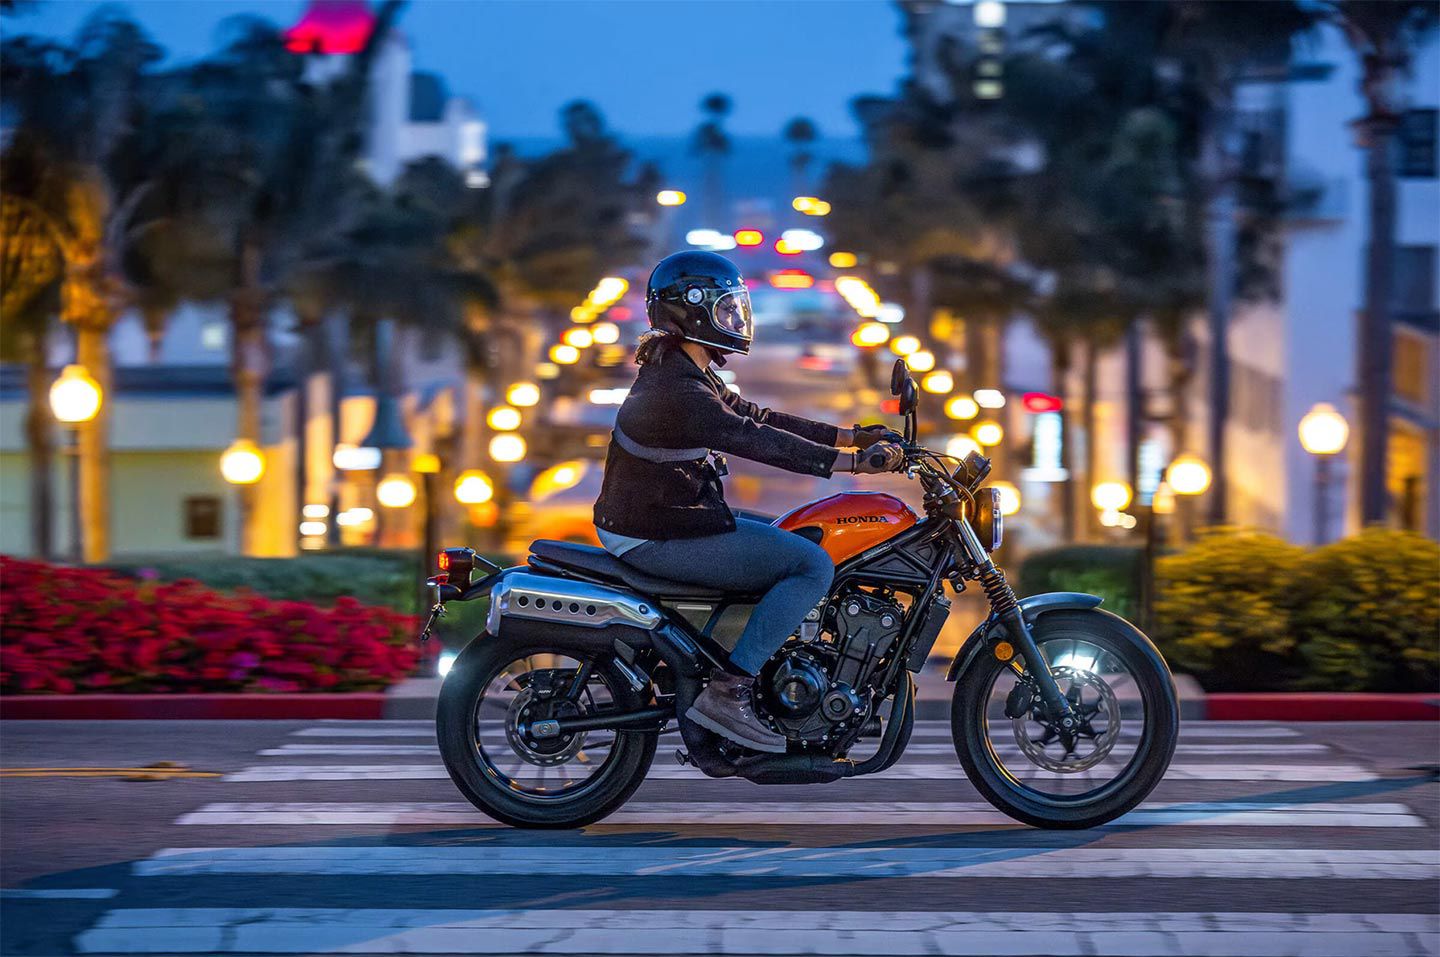 Here’s what you might look like aboard the Honda SCL500 while scrambling around in urban environments after dark.